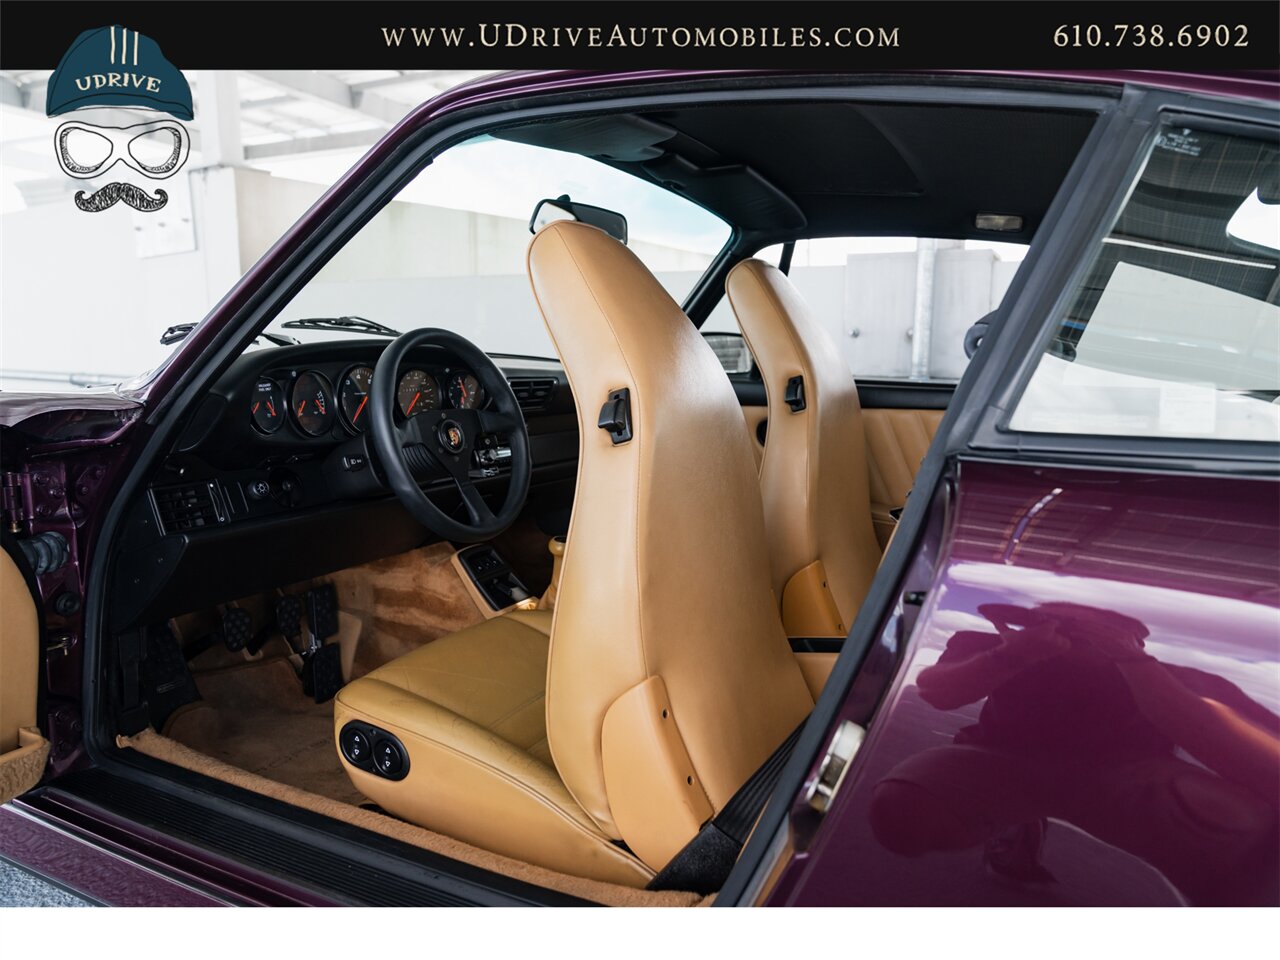 1991 Porsche 911 Carrera 2  5 Speed $57k in Service and UpGrades Since 2020 - Photo 52 - West Chester, PA 19382